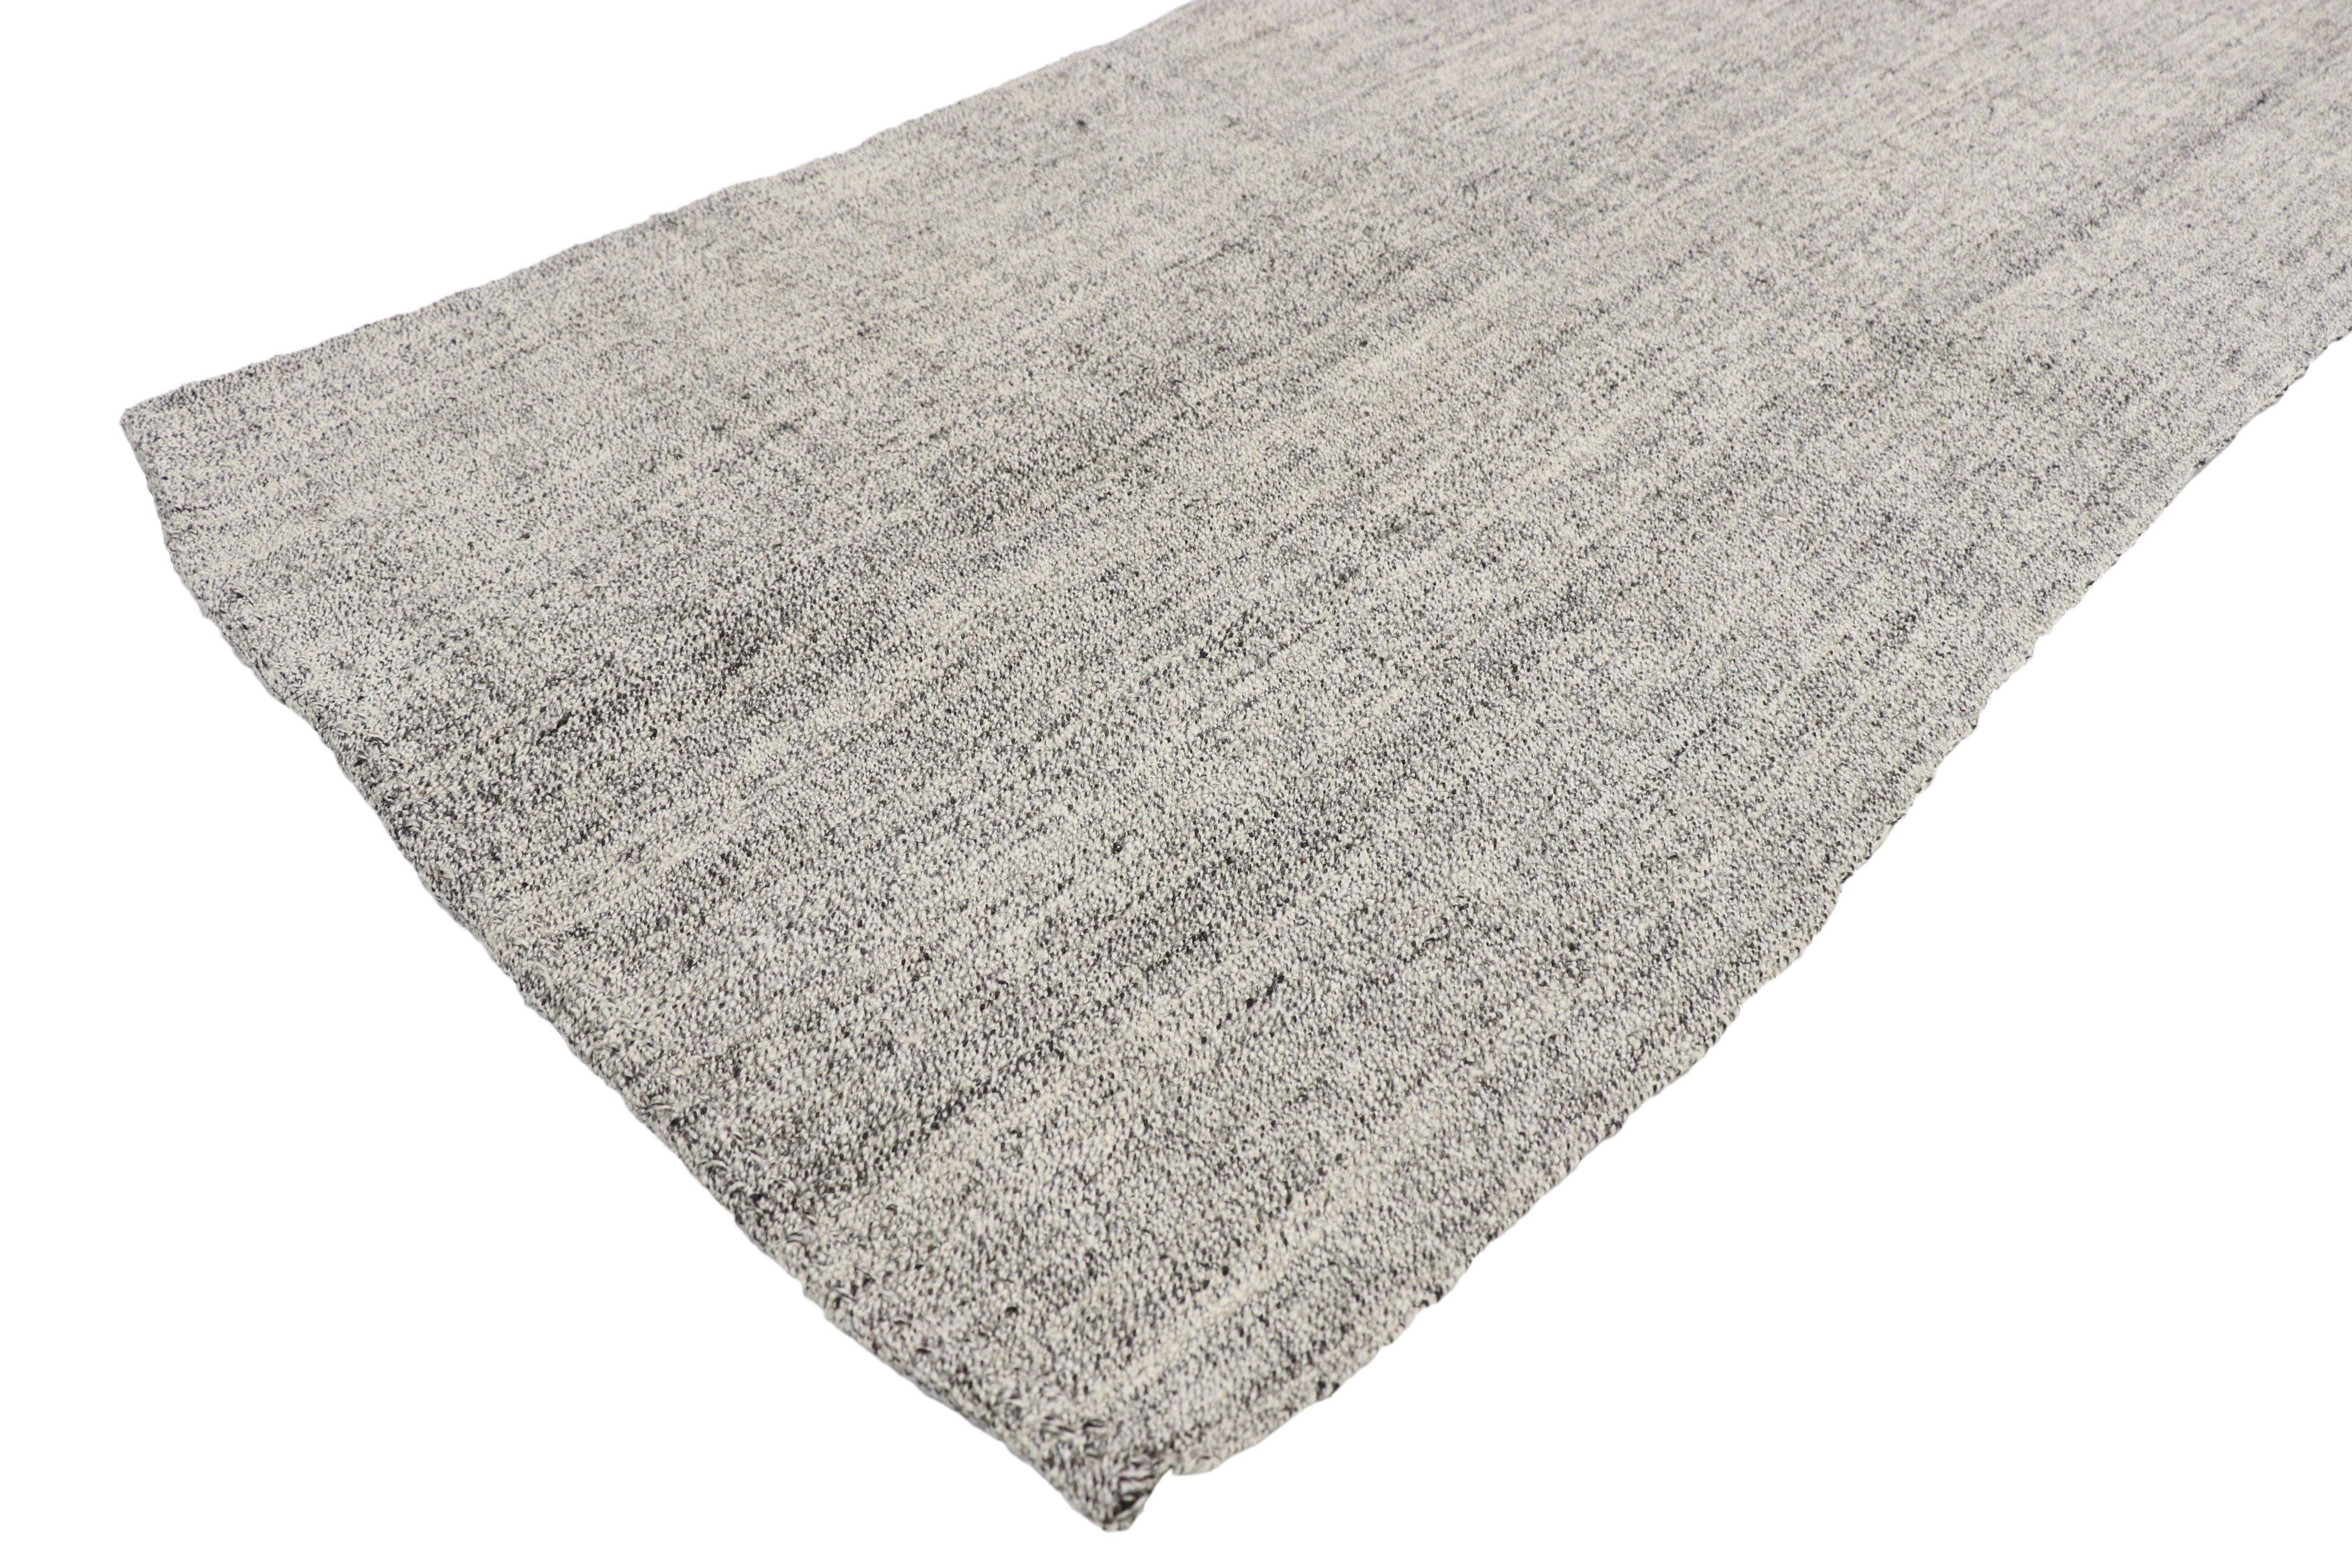 50893 vintage Turkish Kilim extra-long hallway runner with Modern Industrial style. This vintage Turkish Kilim runner is a beautiful marriage of modern Industrial and fresh, contemporary form. Natural wool with goat hair and hemp striations shapes